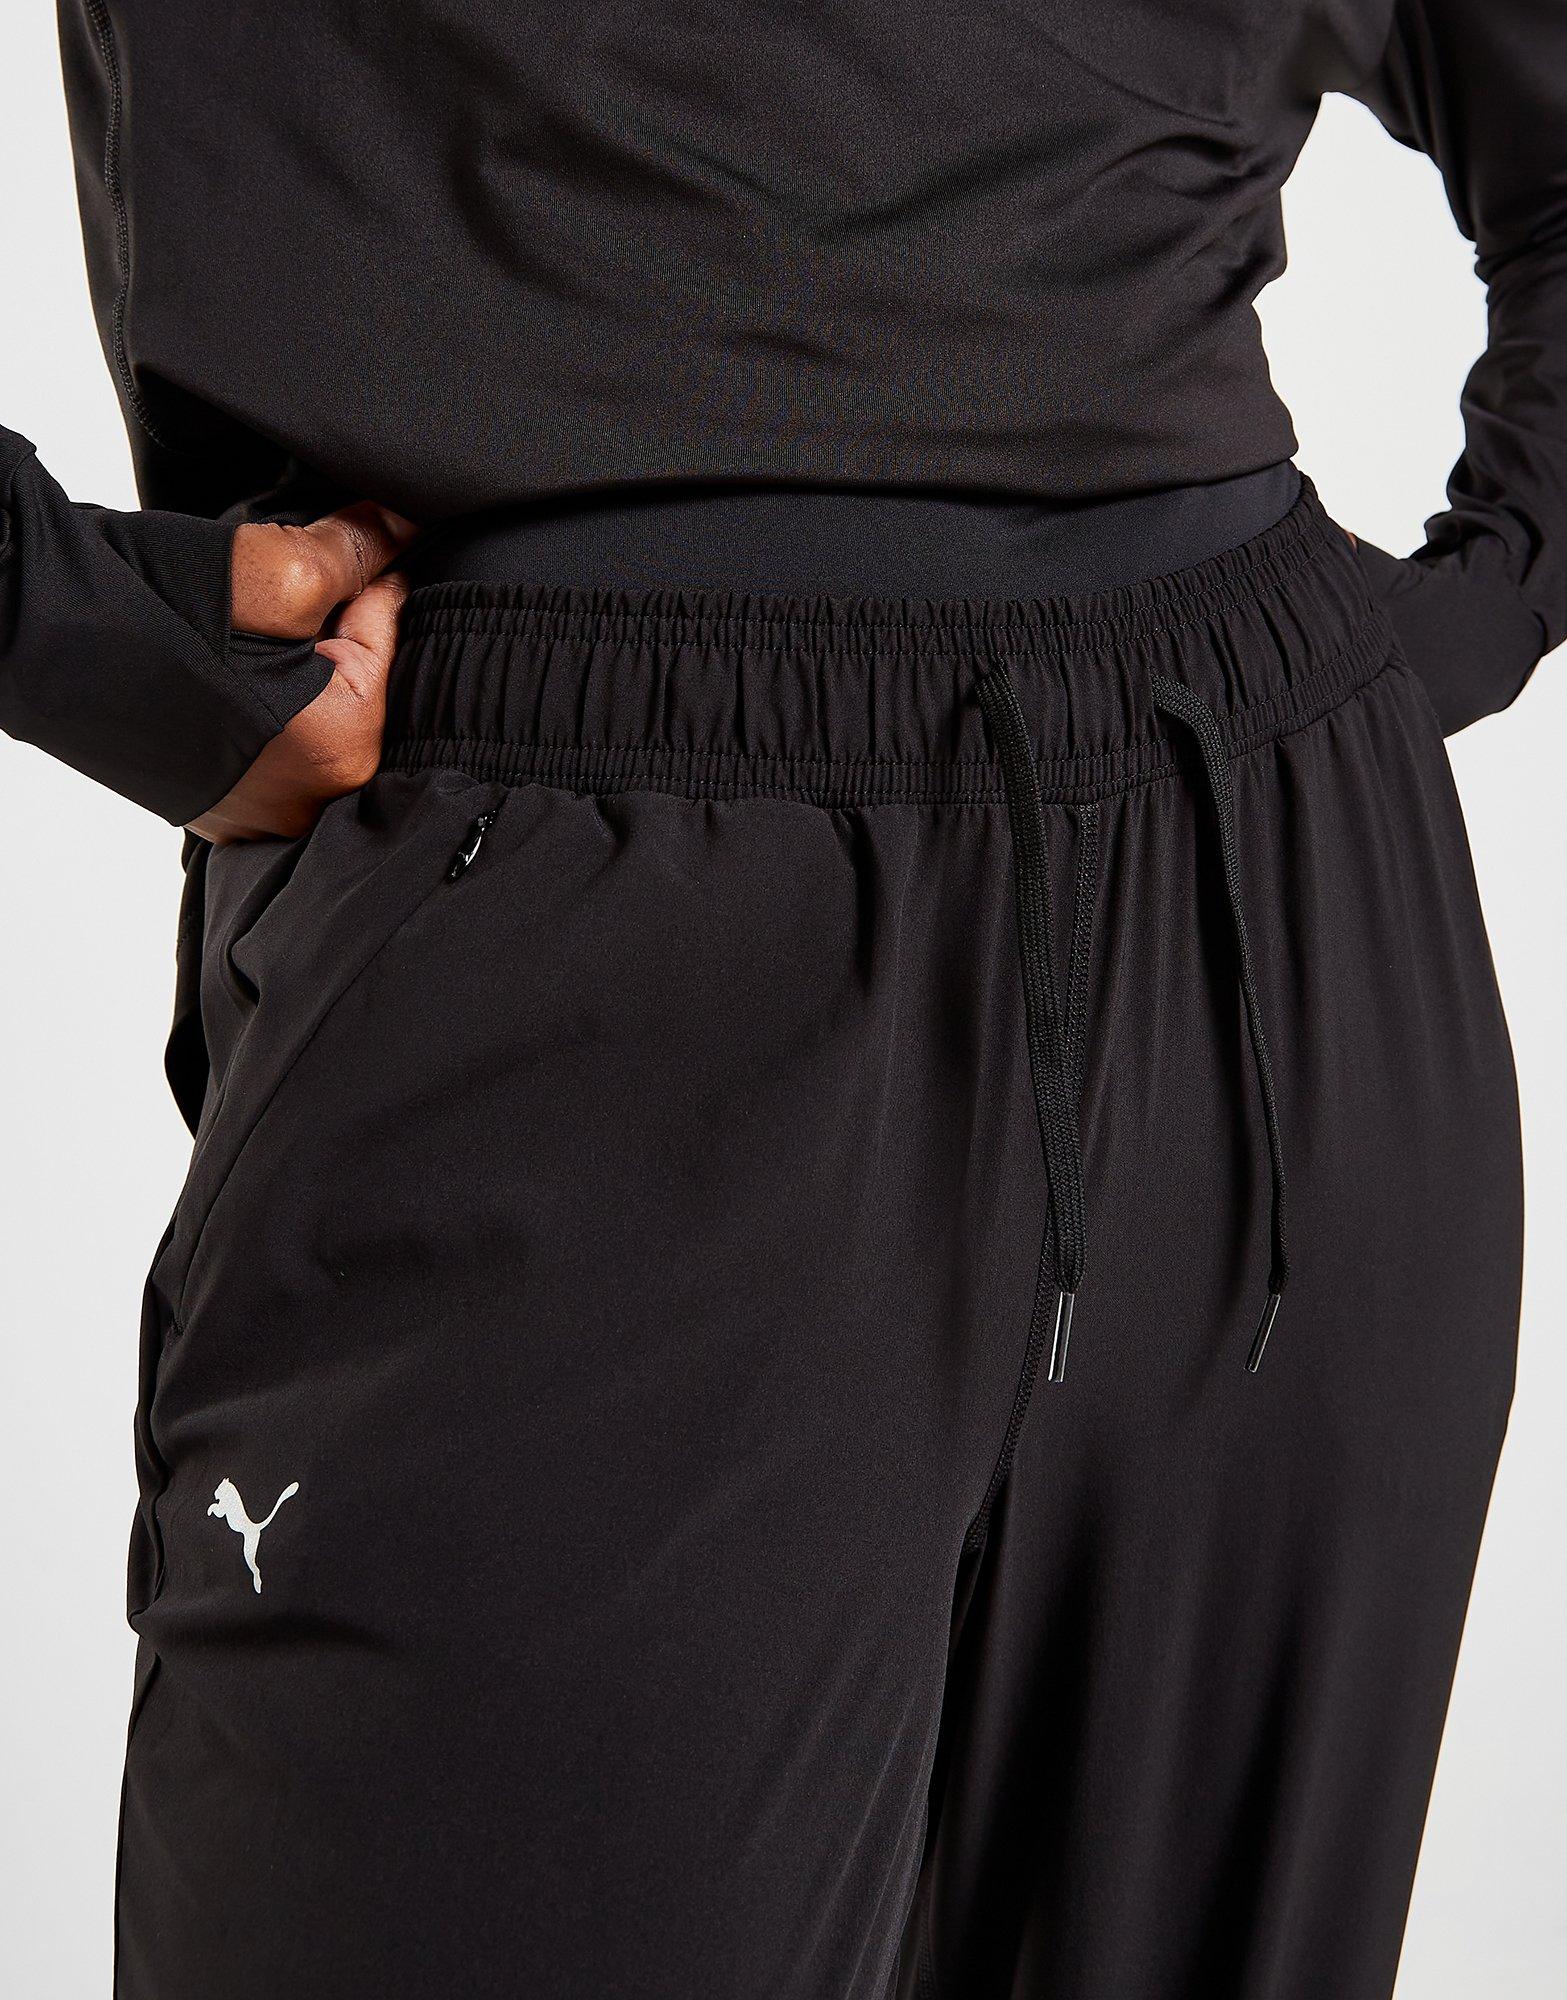 Puma Training modest activewear wide leg trousers in black